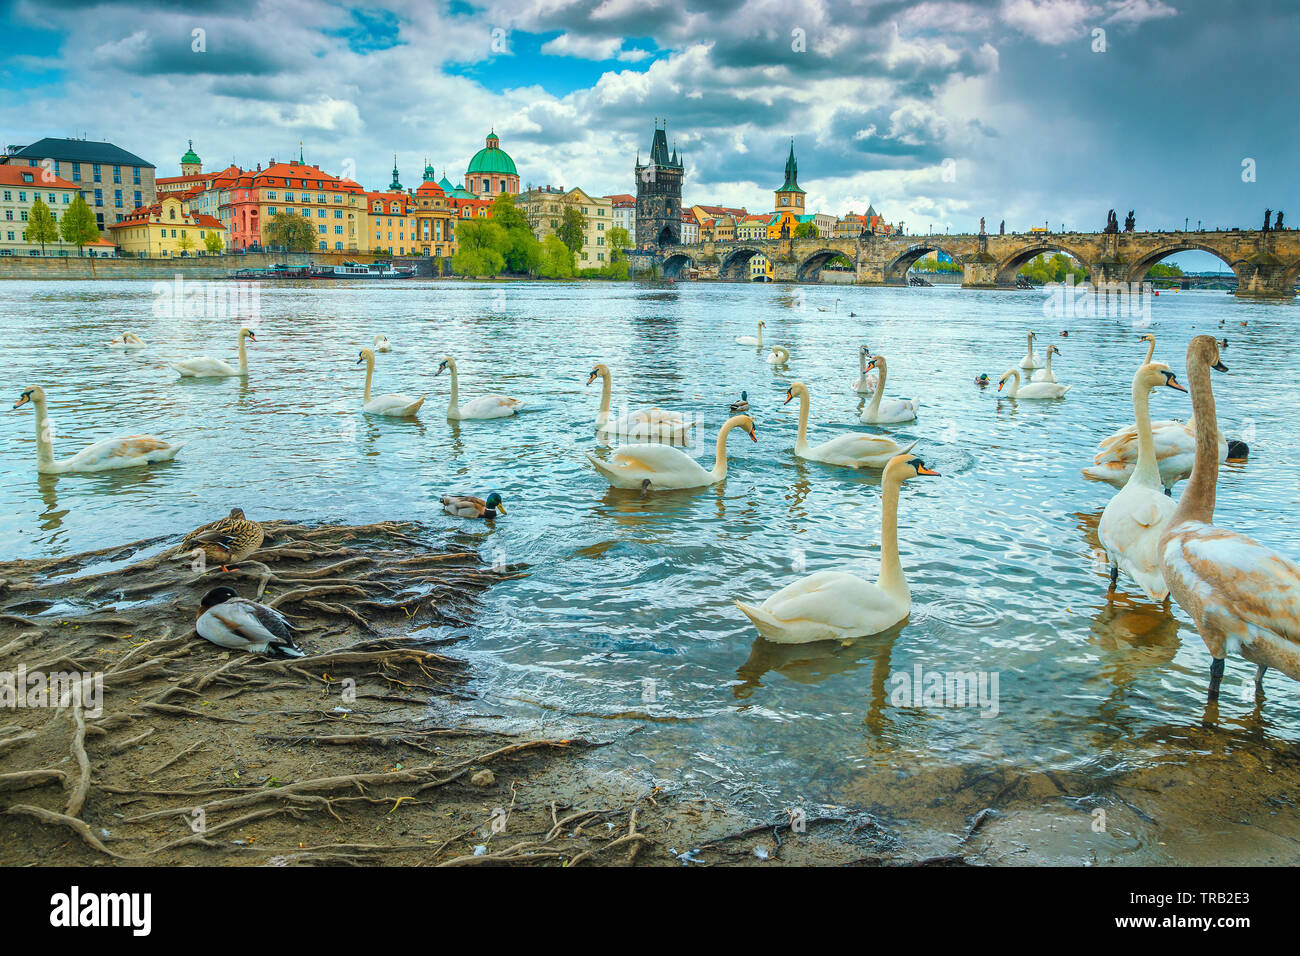 Popular travel and tourism location in Europe. Picturesque cityscape with tame swans and ducks on Vltava river. Stunning Prague cityscape, Czech Repub Stock Photo